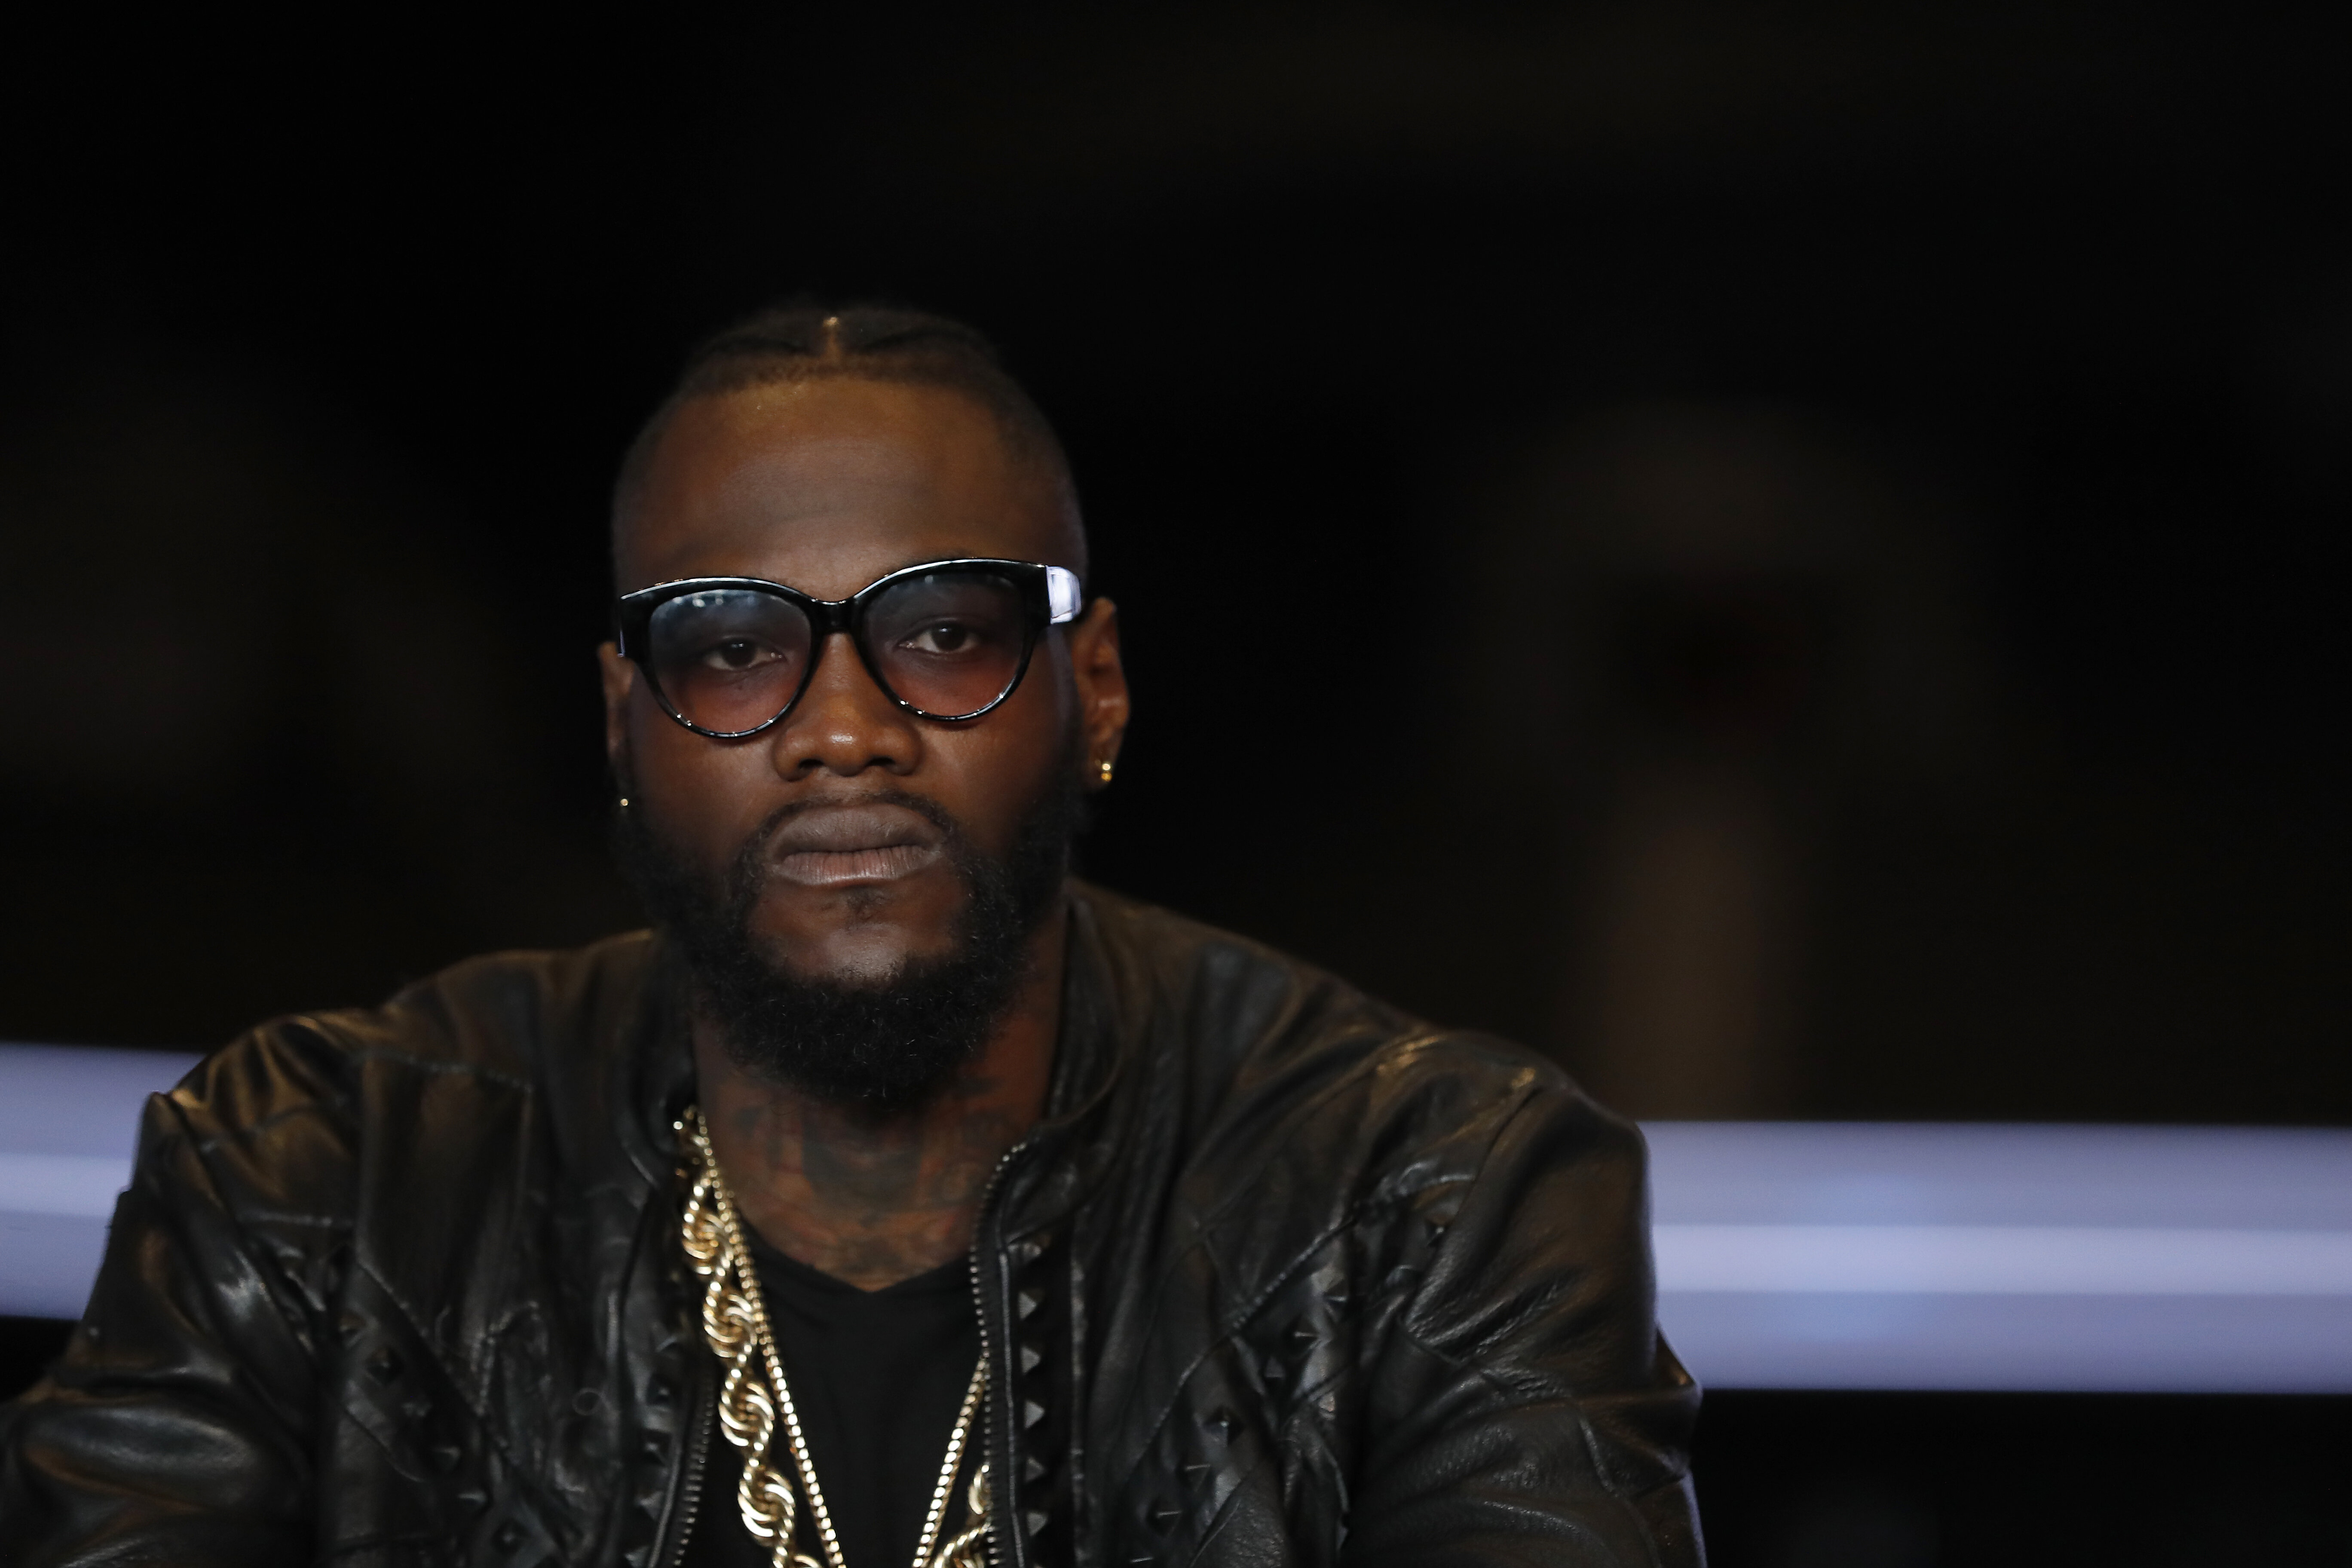 Deontay Wilder: I'm Focused And Ready! - Boxing News 24